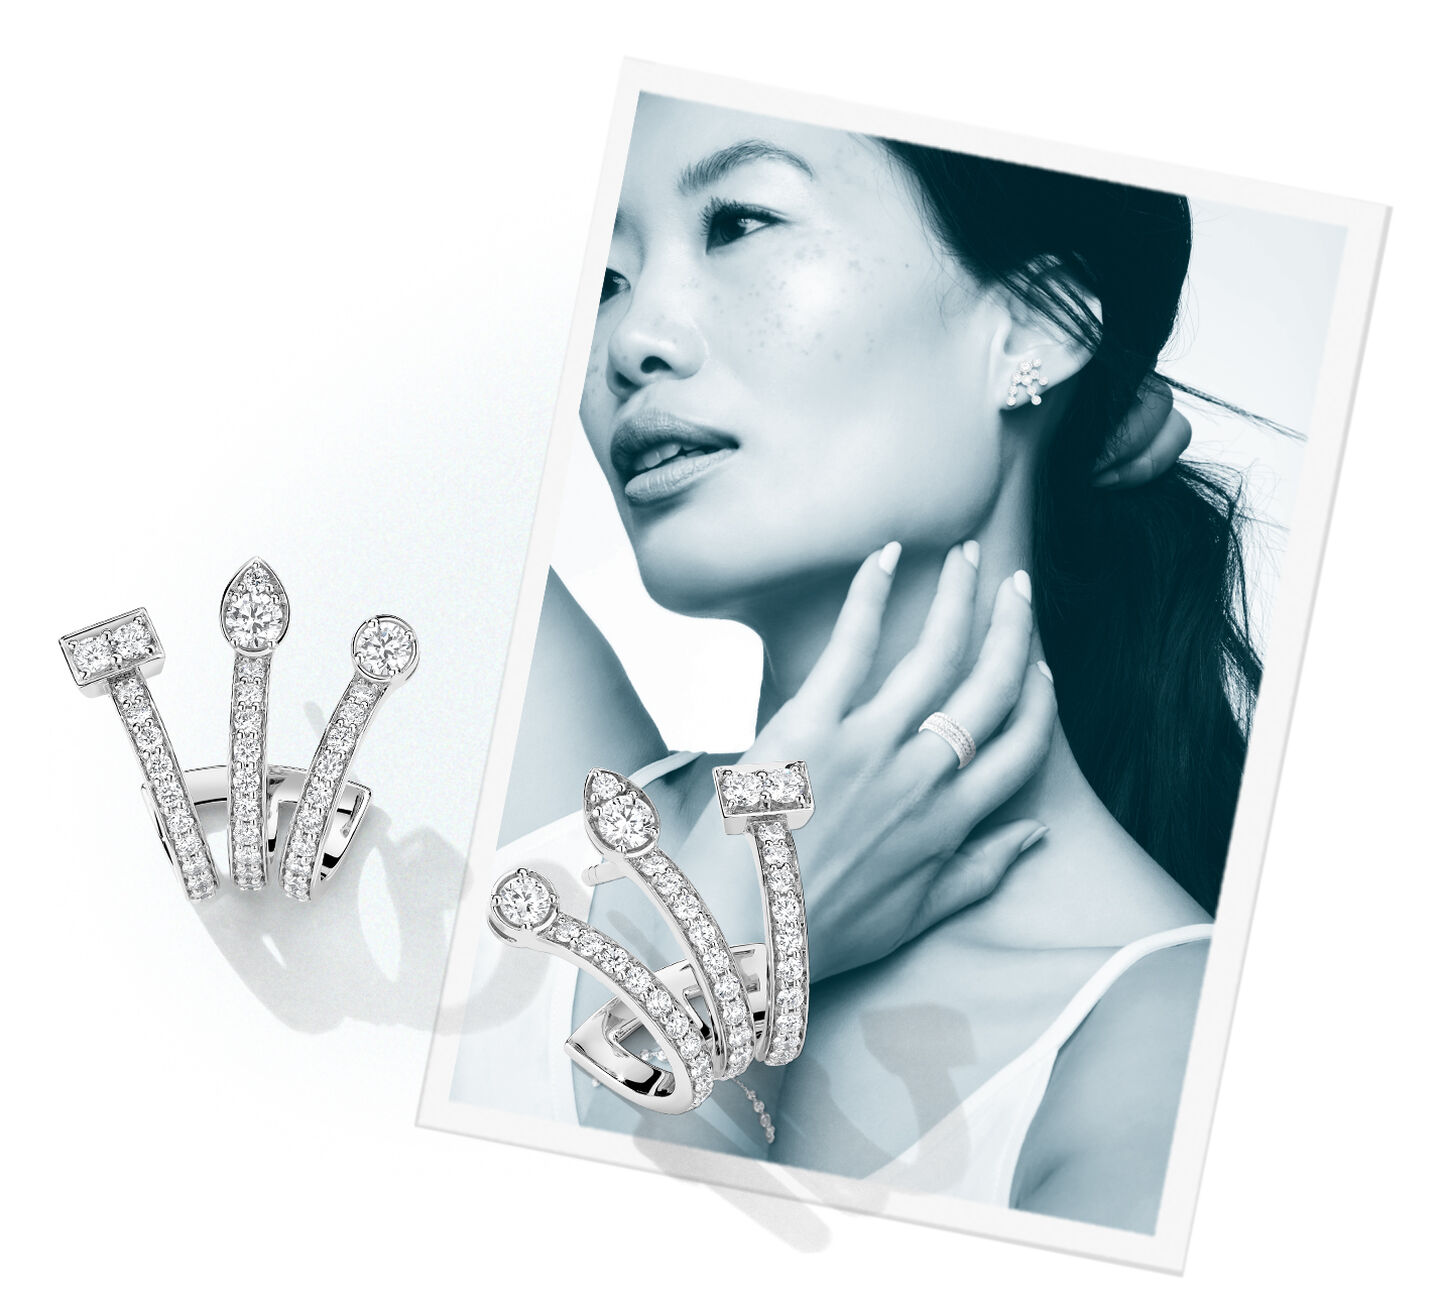 Diamond earrings sitting on a photograph of a model 